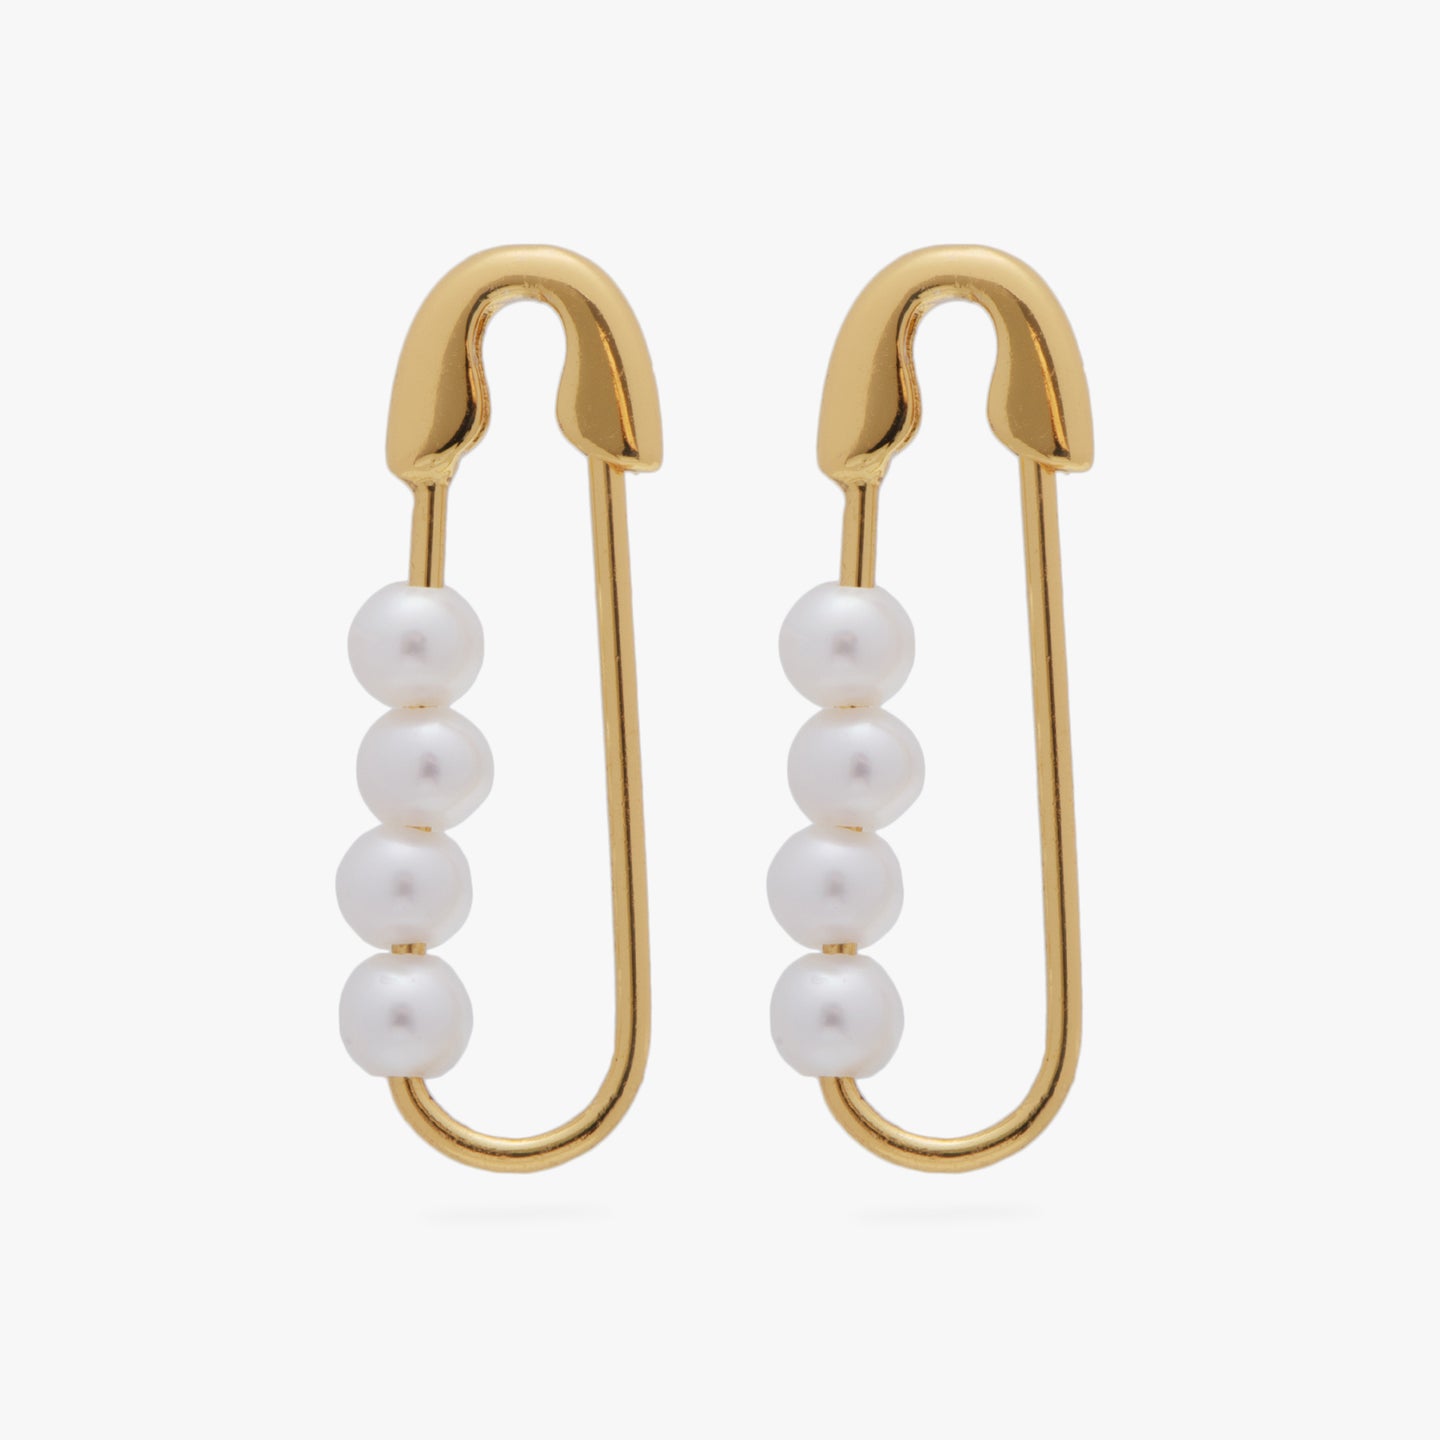 This is a small gold safety pin earring with pearl accents [pair] color:null|gold / gold|gold